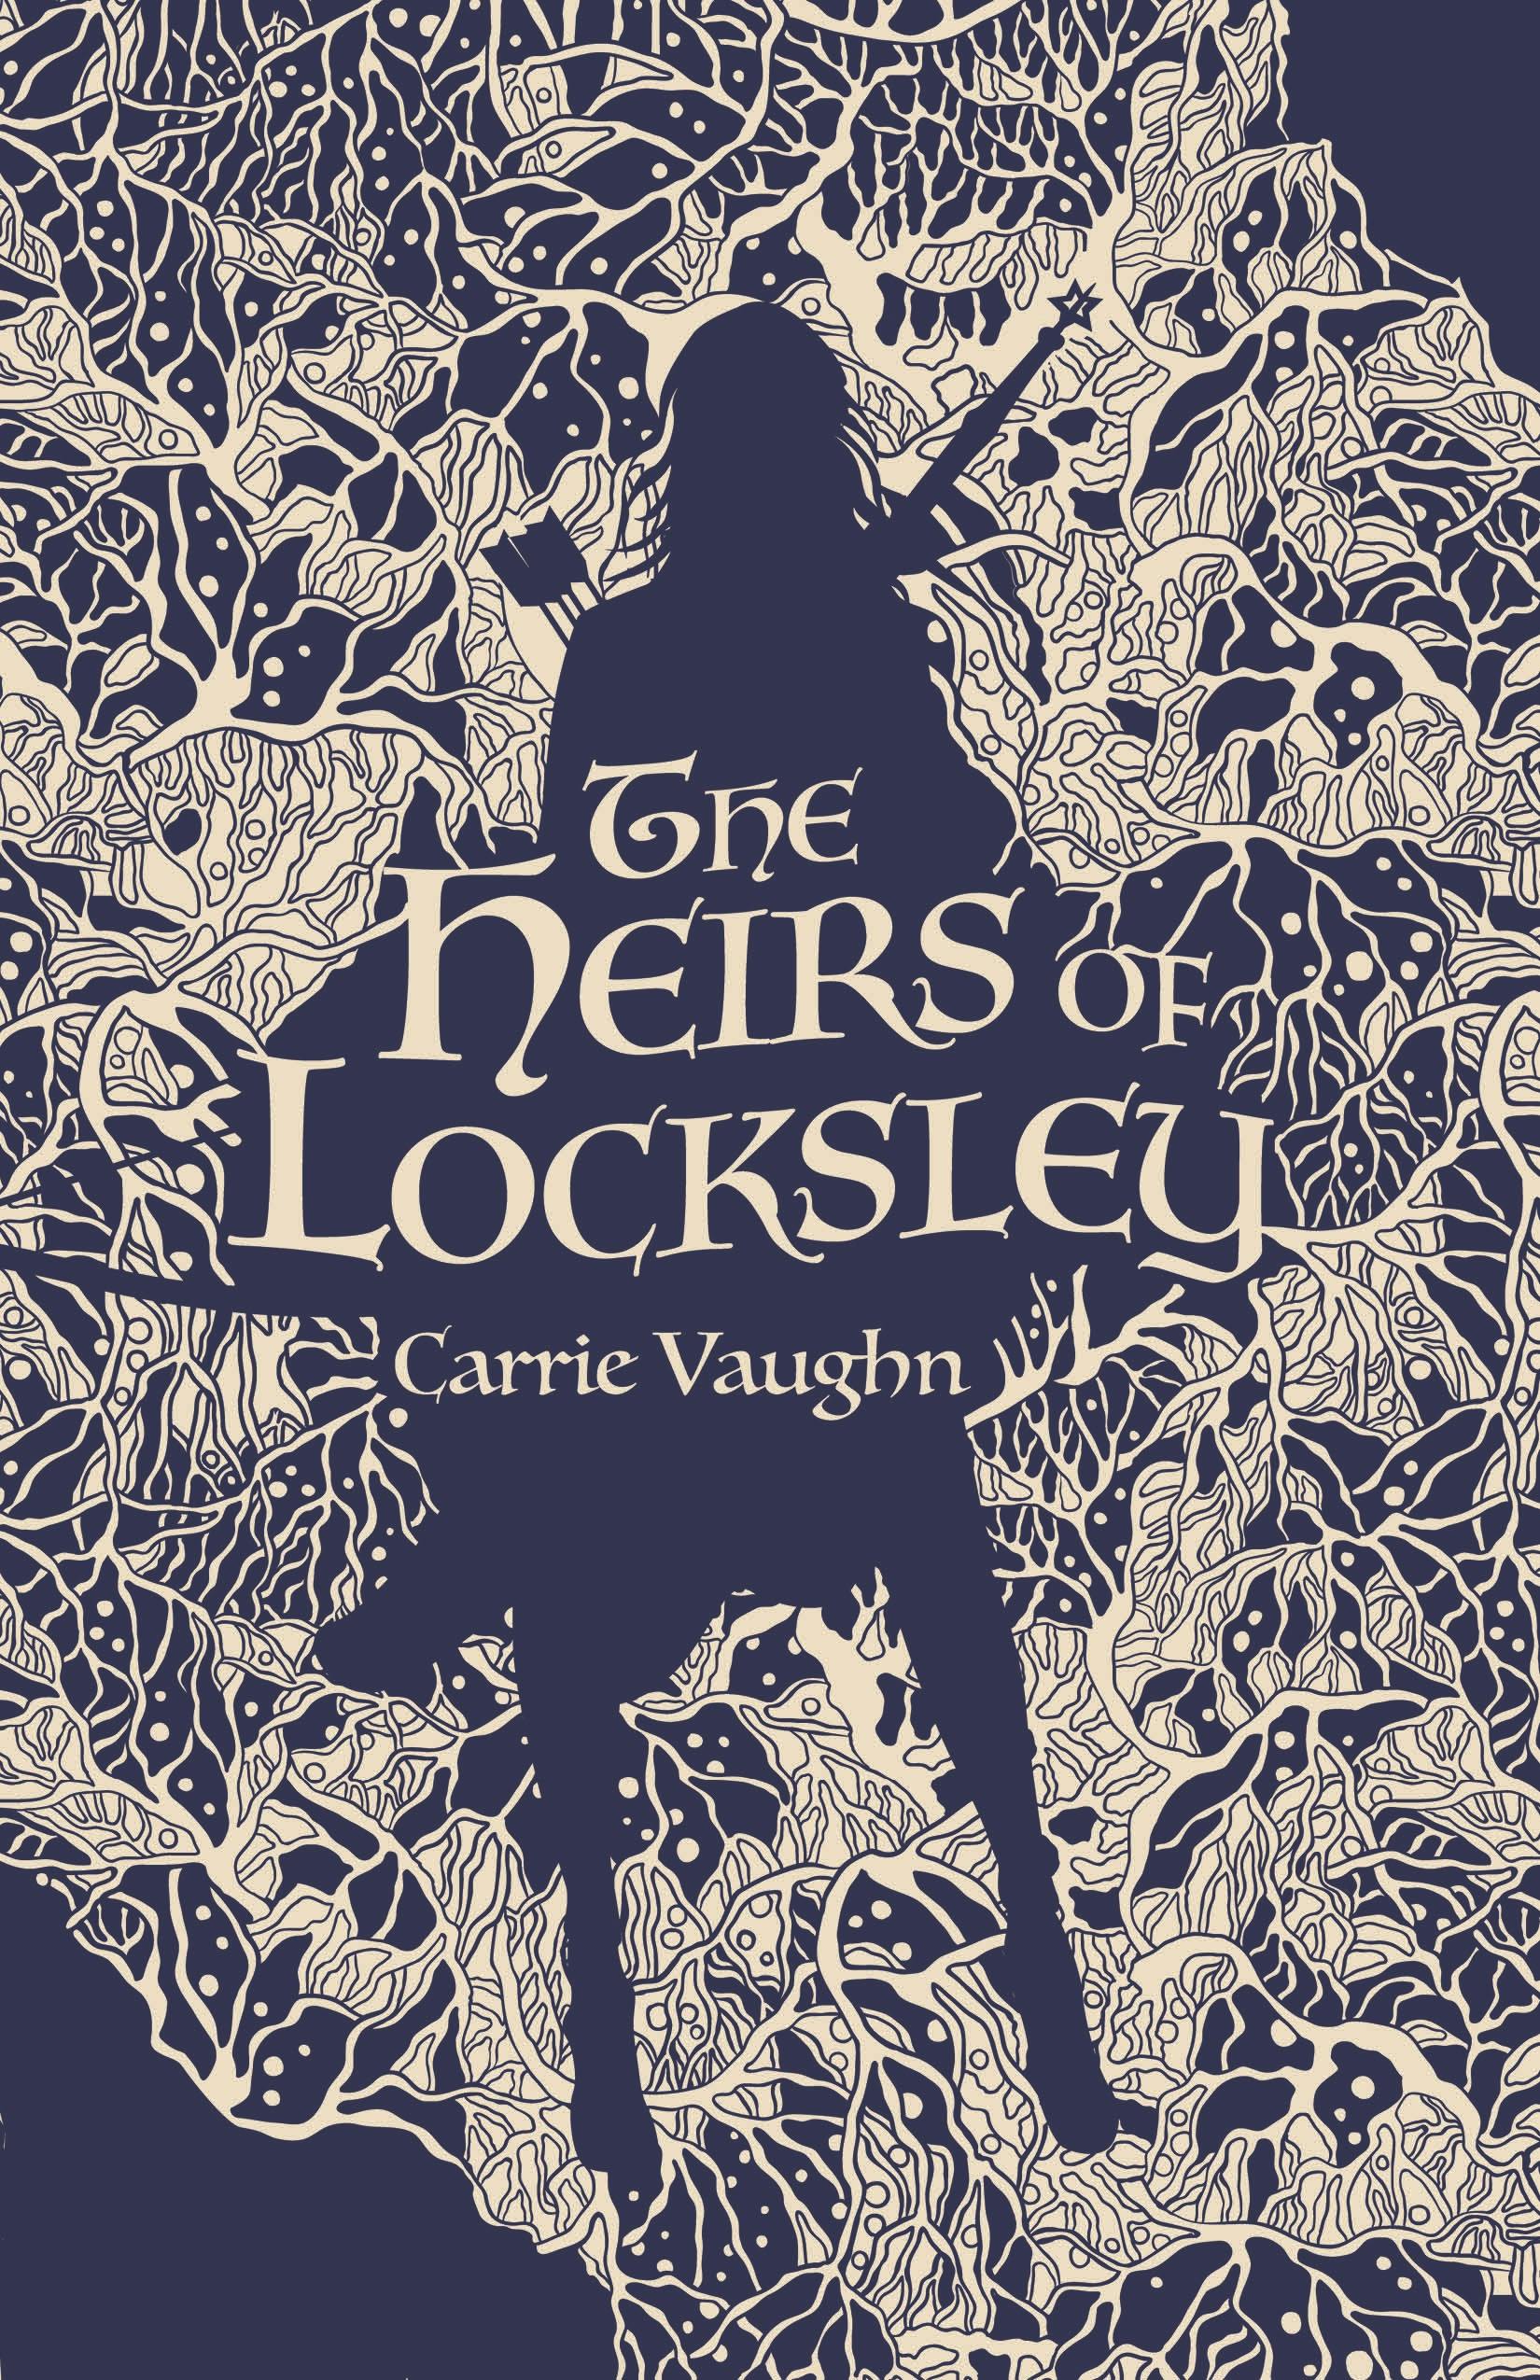 Cover for the book titled as: The Heirs of Locksley